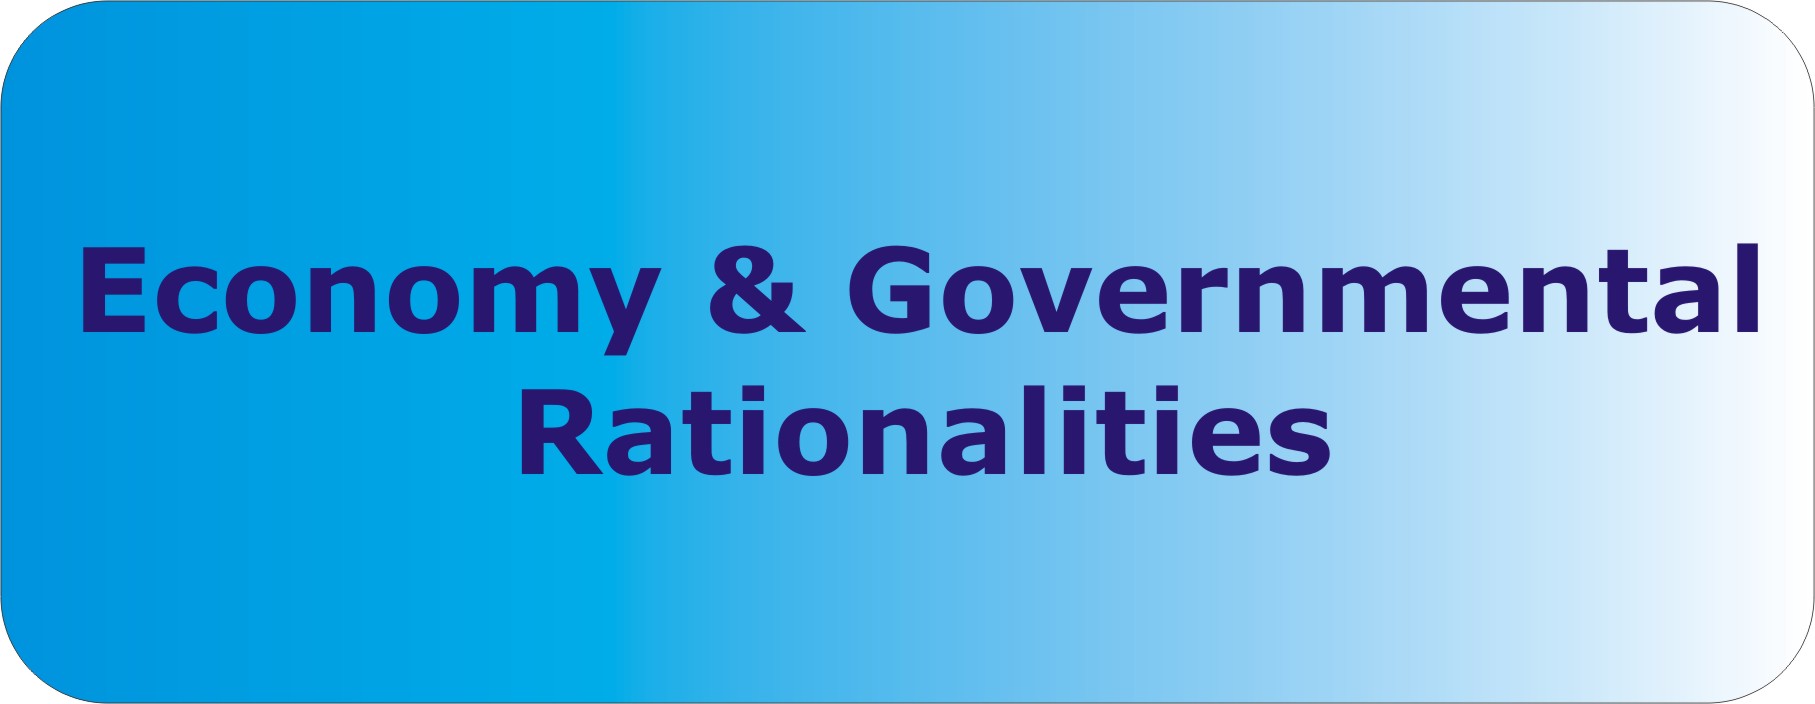 Economy and Governmental Rationalities